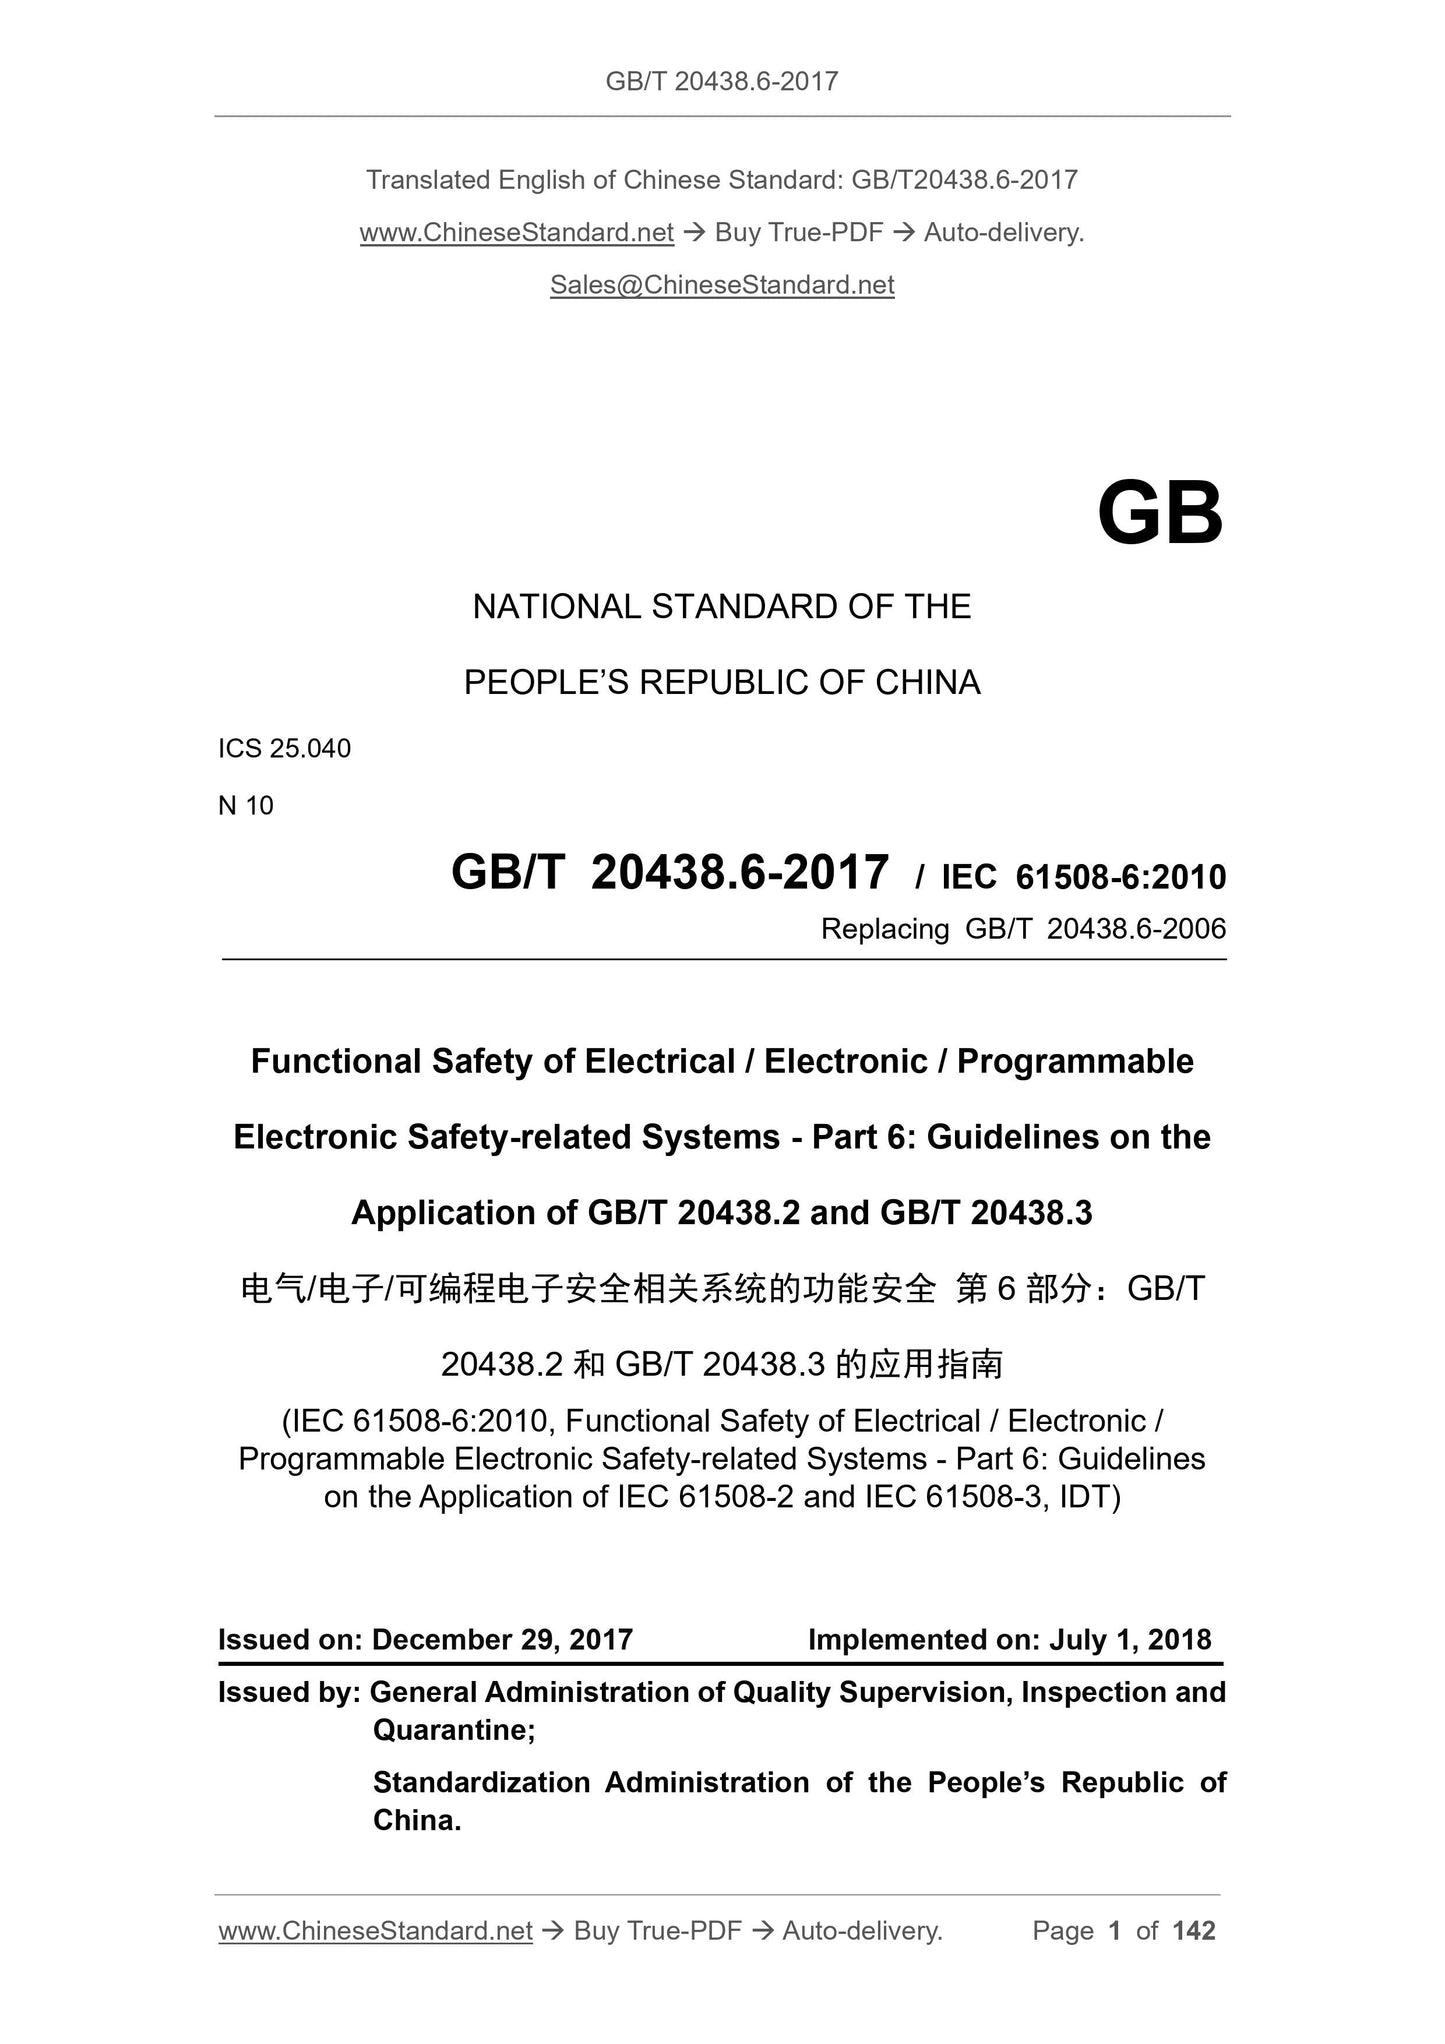 GB/T 20438.6-2017 Page 1